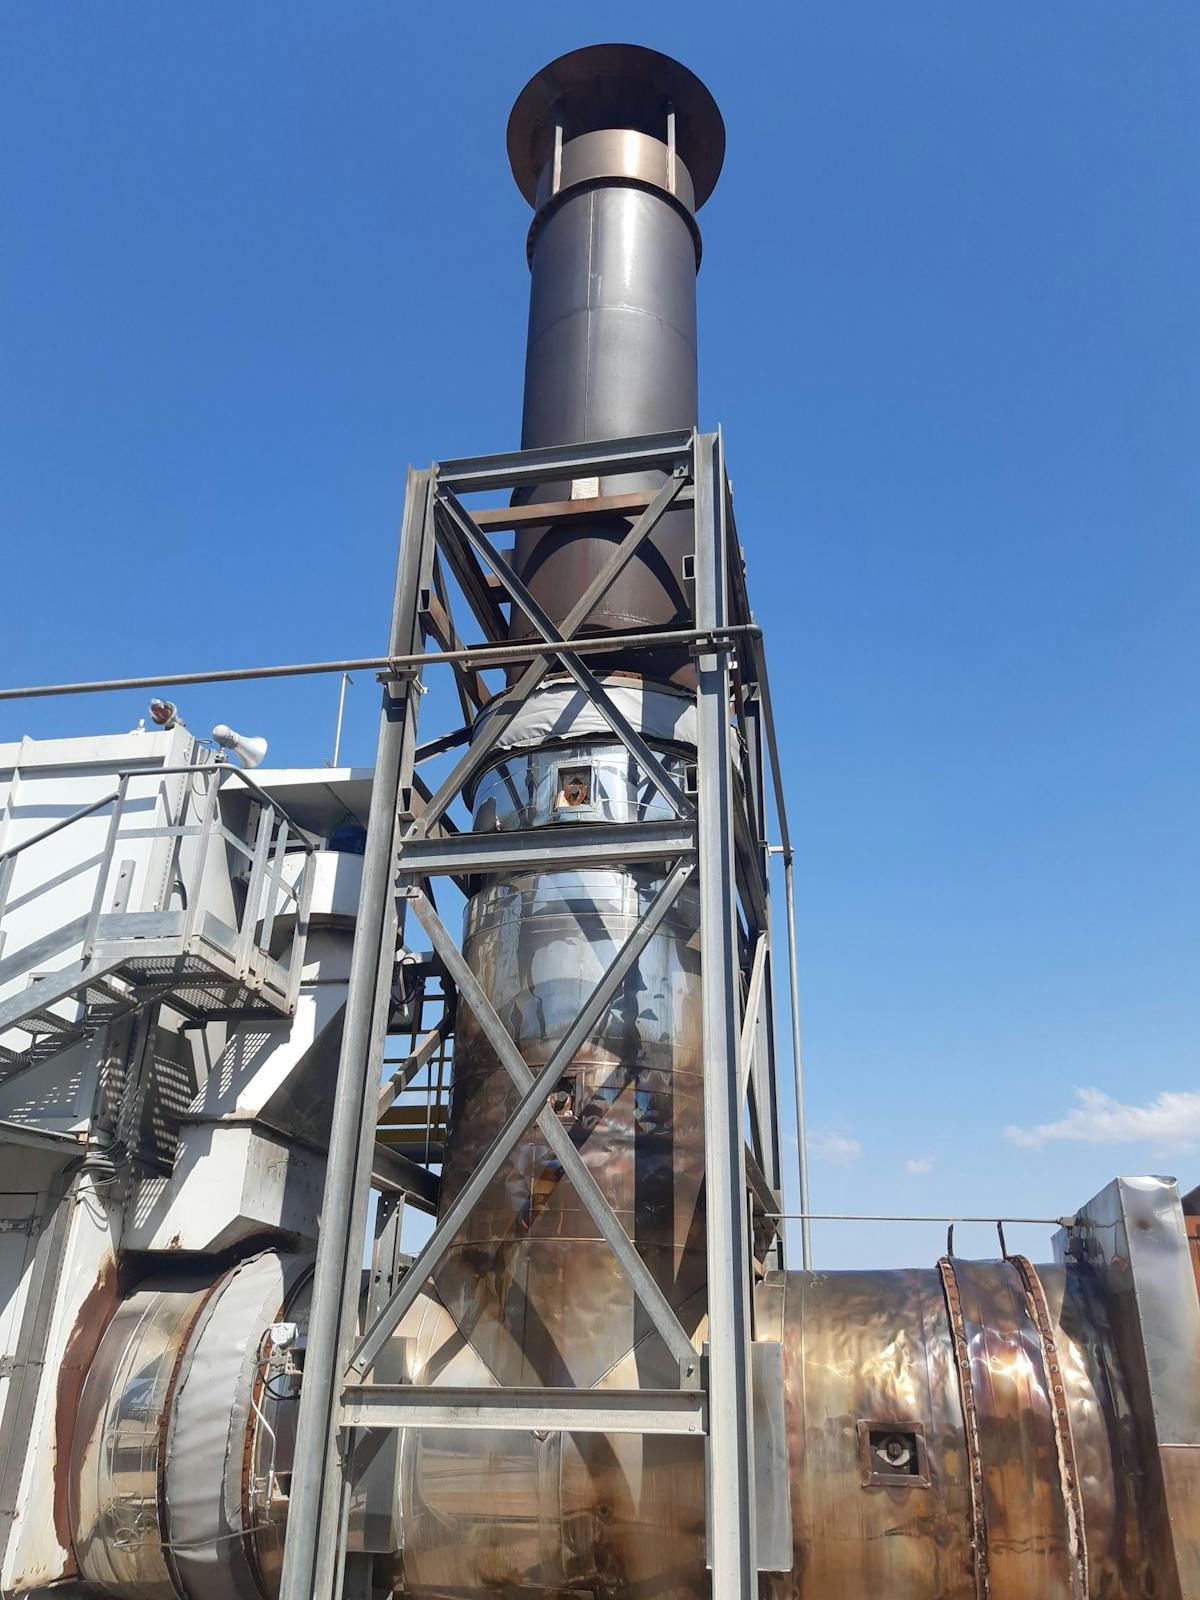 nullPhoto of Turbogas Turbine GE5/1 5MW complete turbogas turbine plant with chimney and exchangers - industrial gas turbine